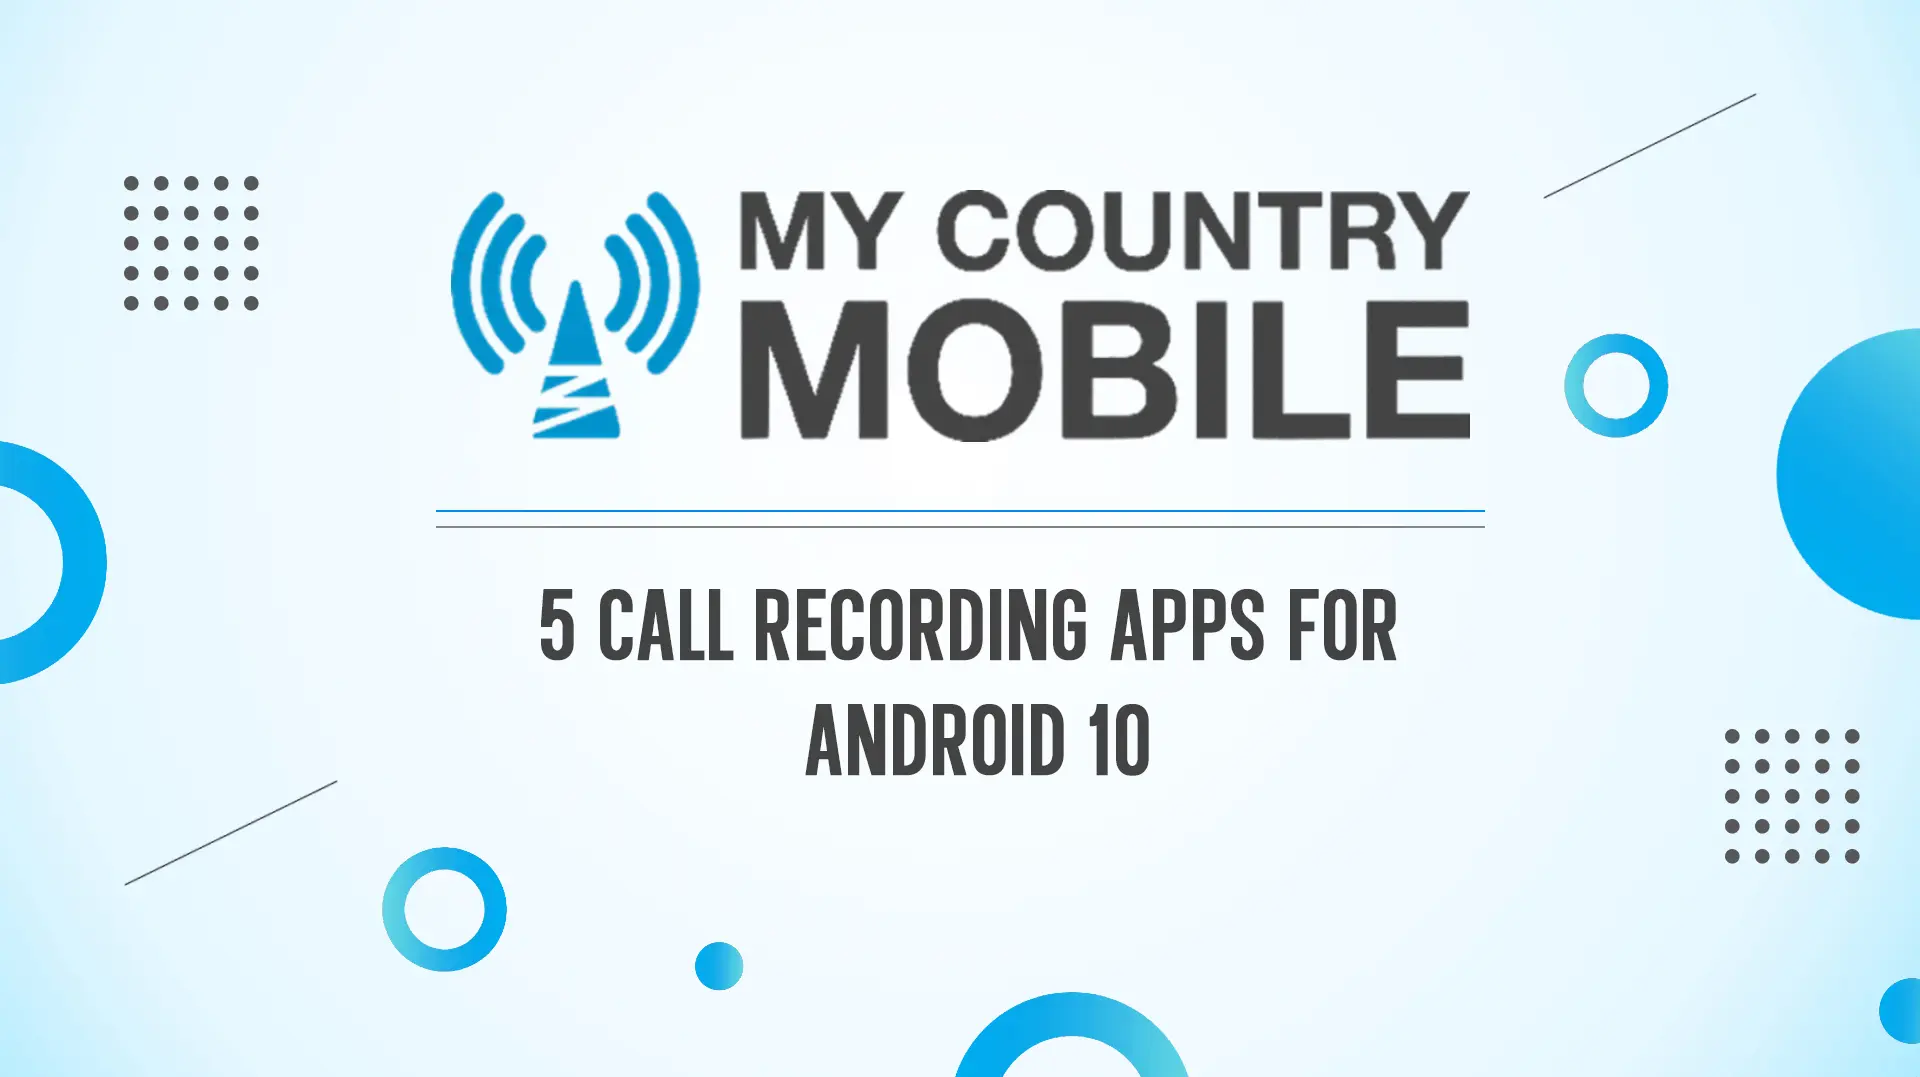 5 Call recording apps for Android 10